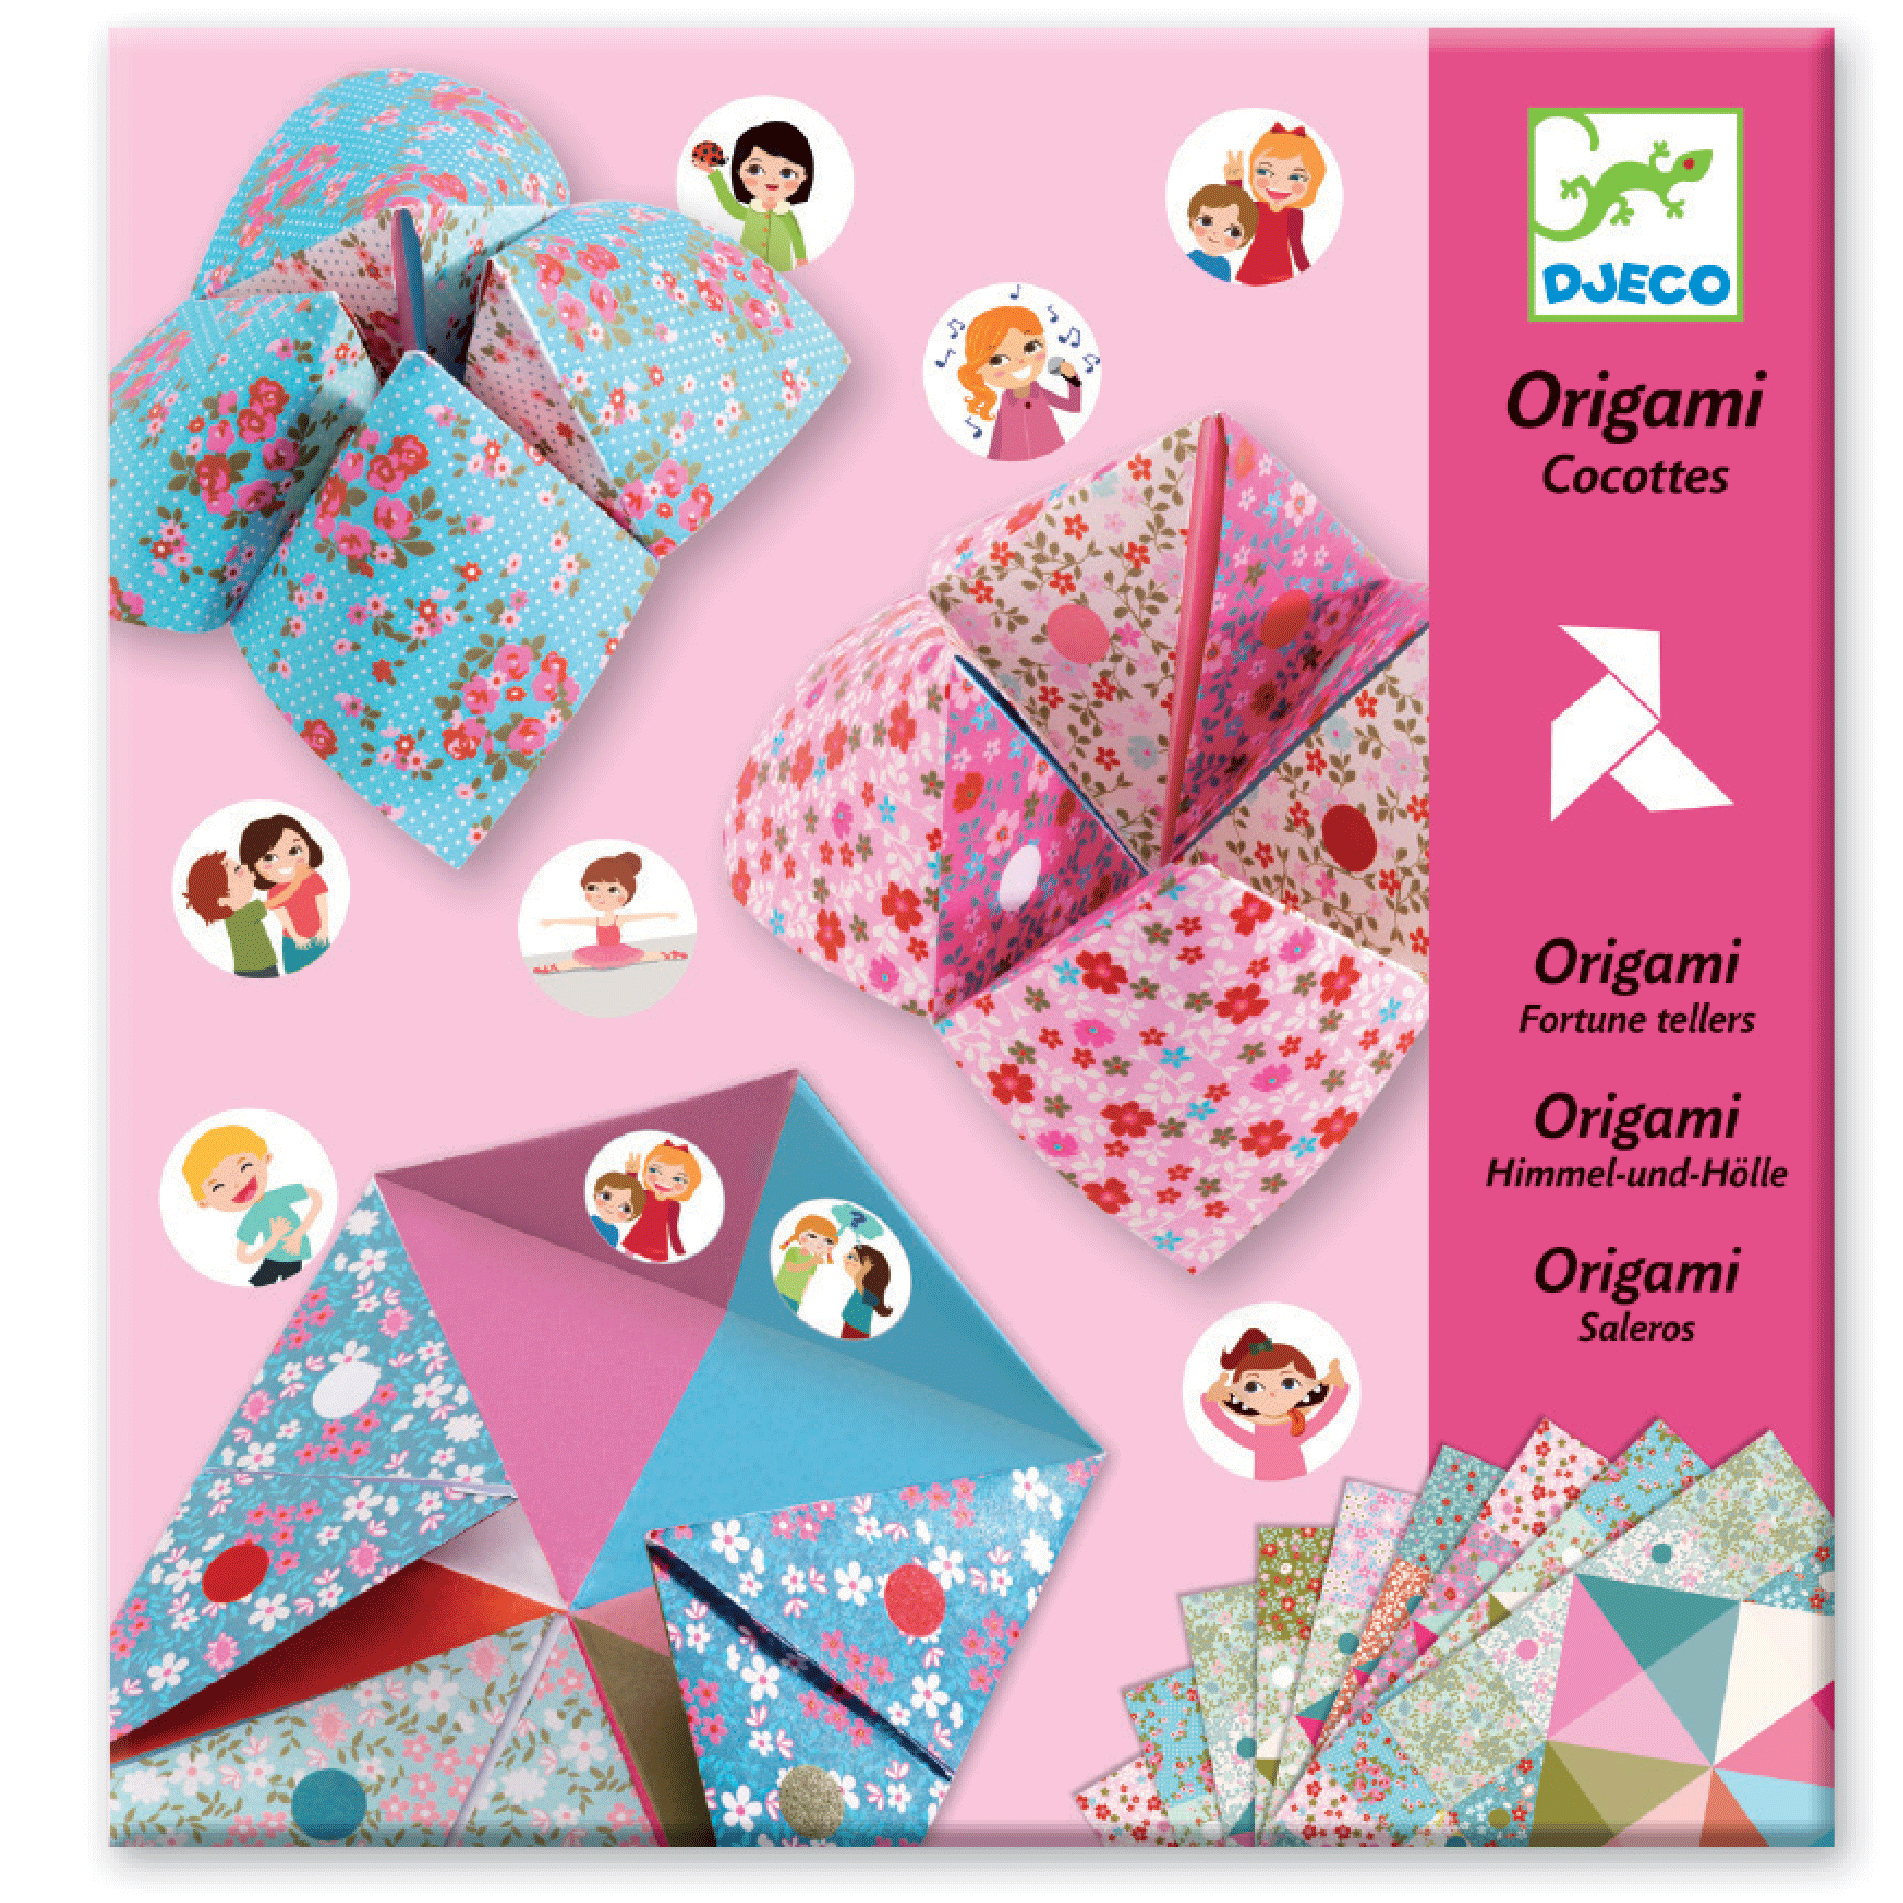 Origami Fortune Tellers by Djeco (Flowers)